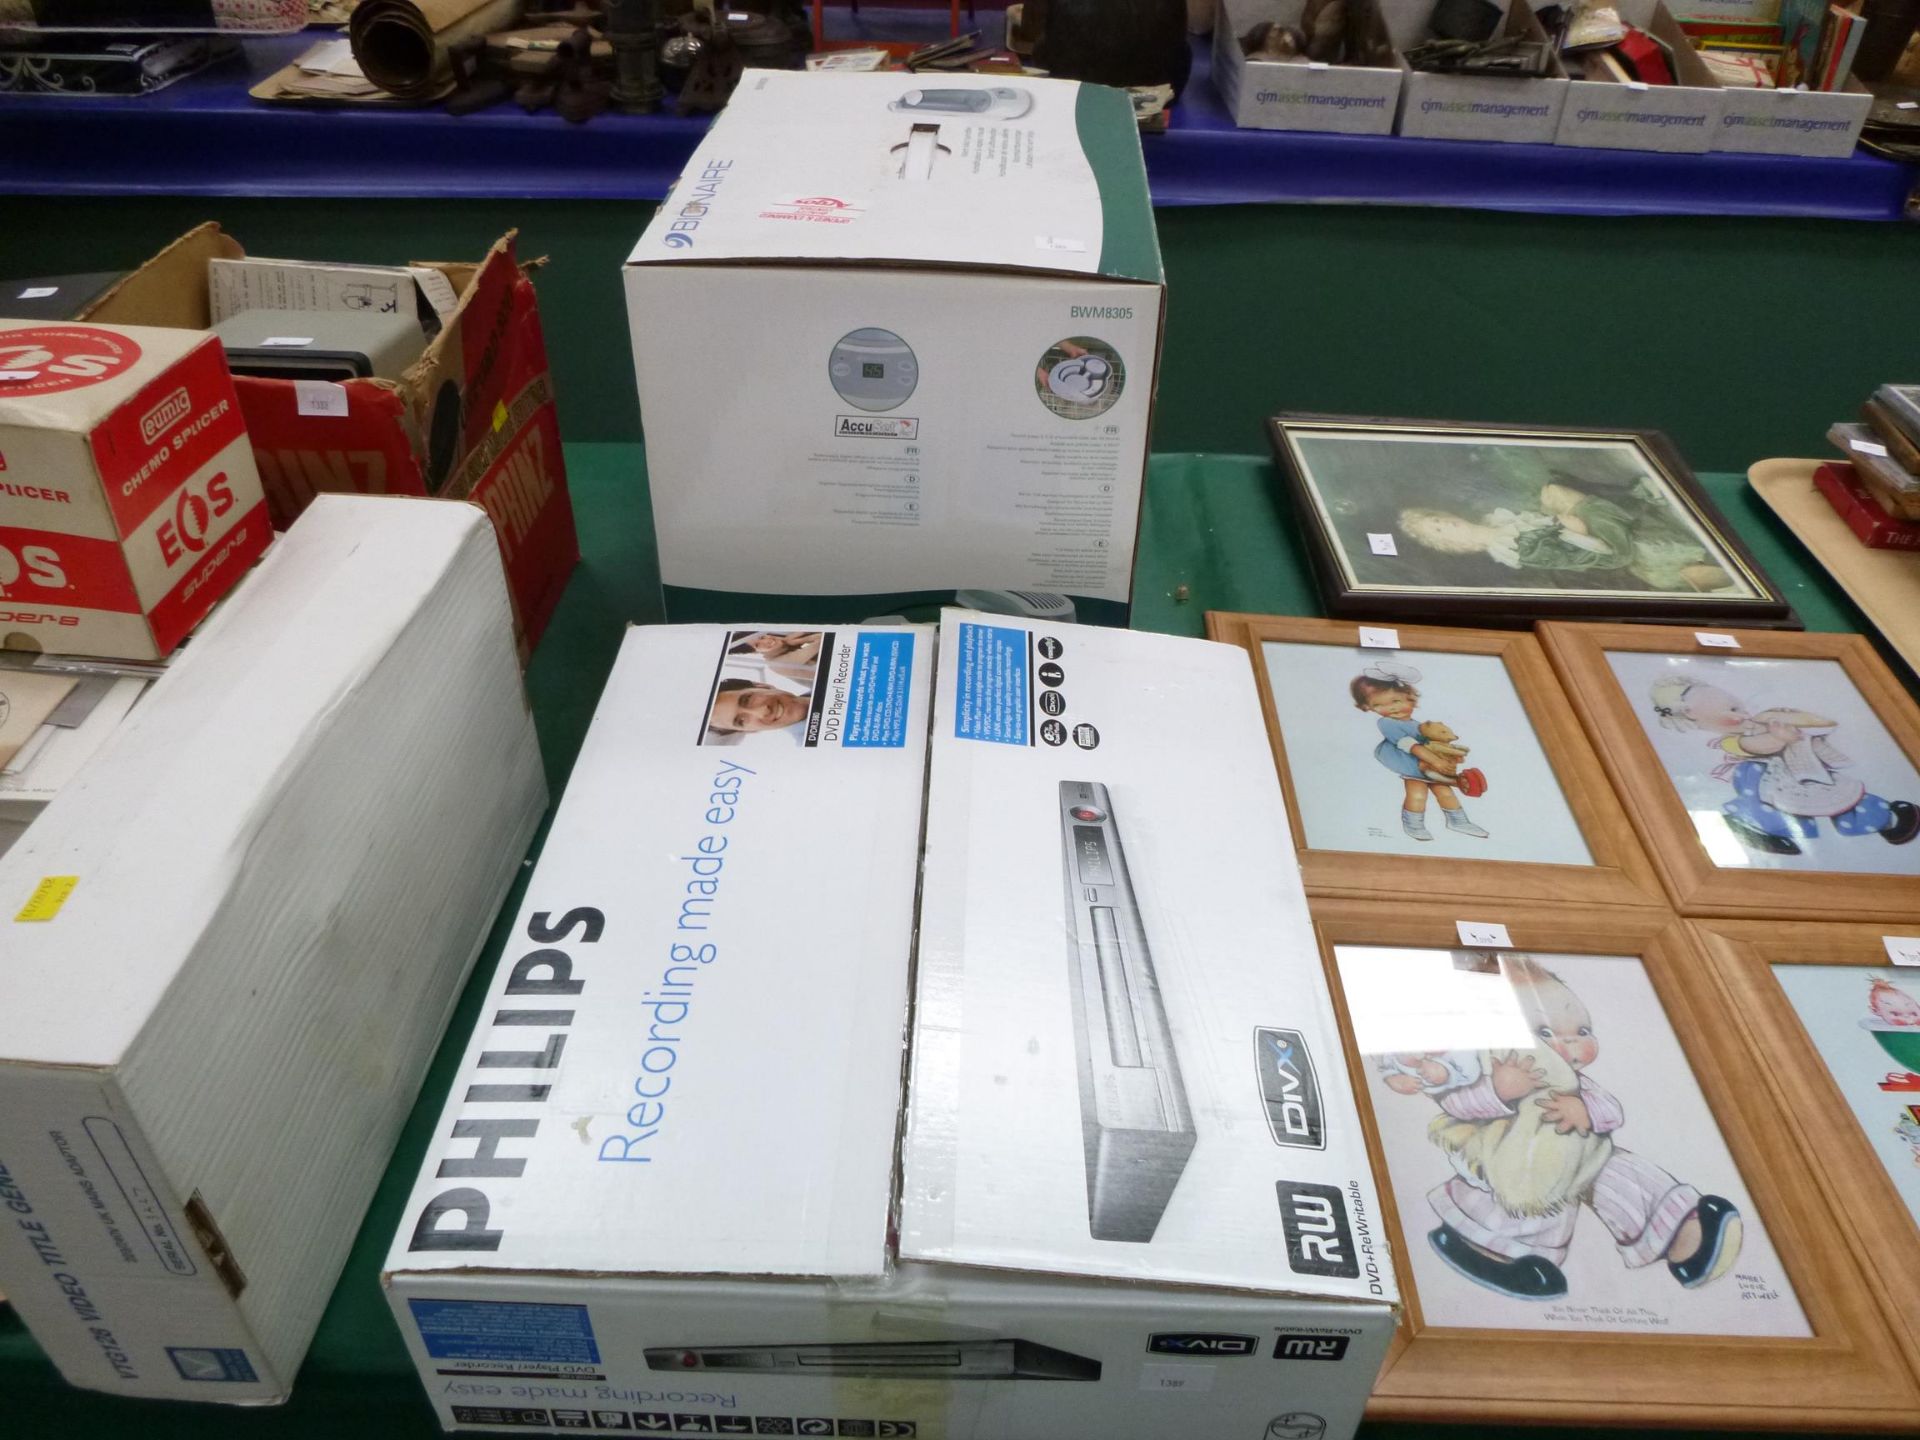 A Philips DVDR3380 DVD Player/Recorder (in box) along with a Bionaire Digital Warm Mist Dehumidifier